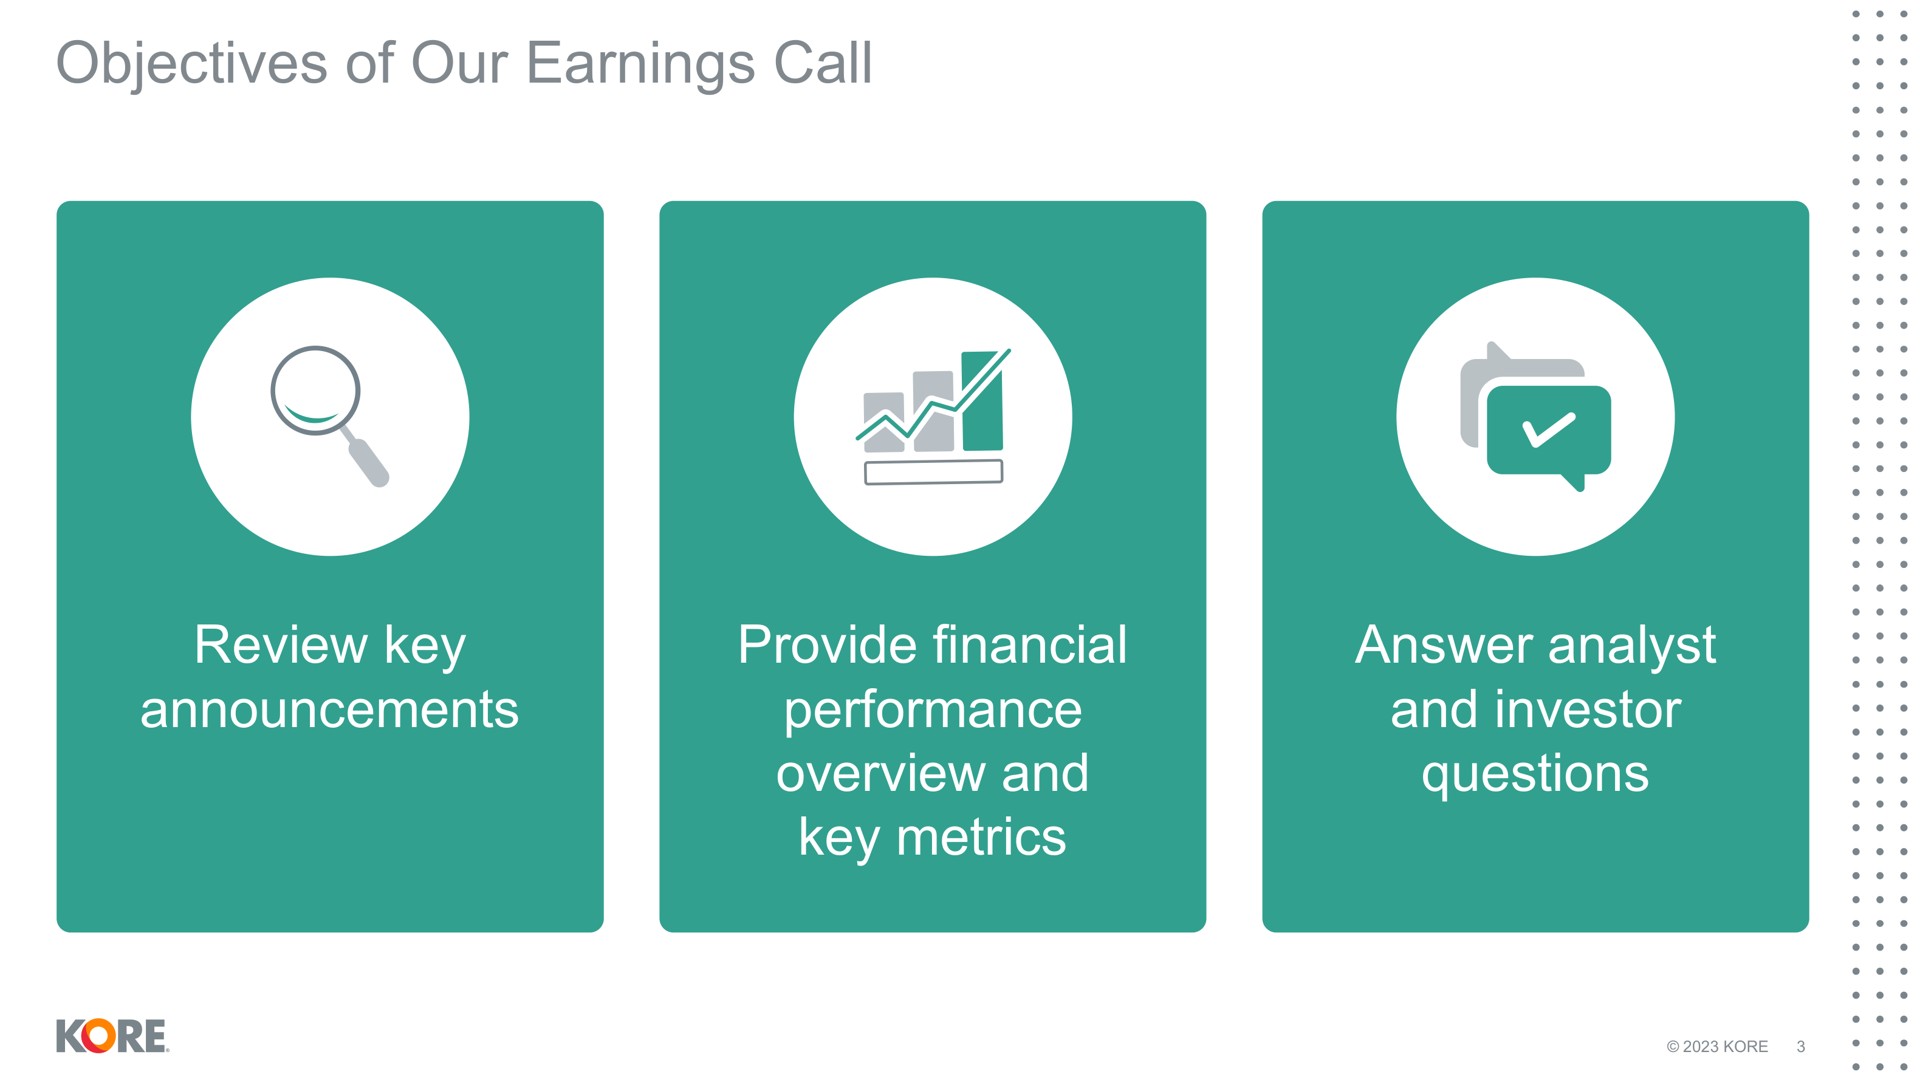 objectives of our earnings call review key announcements provide financial performance overview and key metrics answer analyst and investor questions kore | Kore